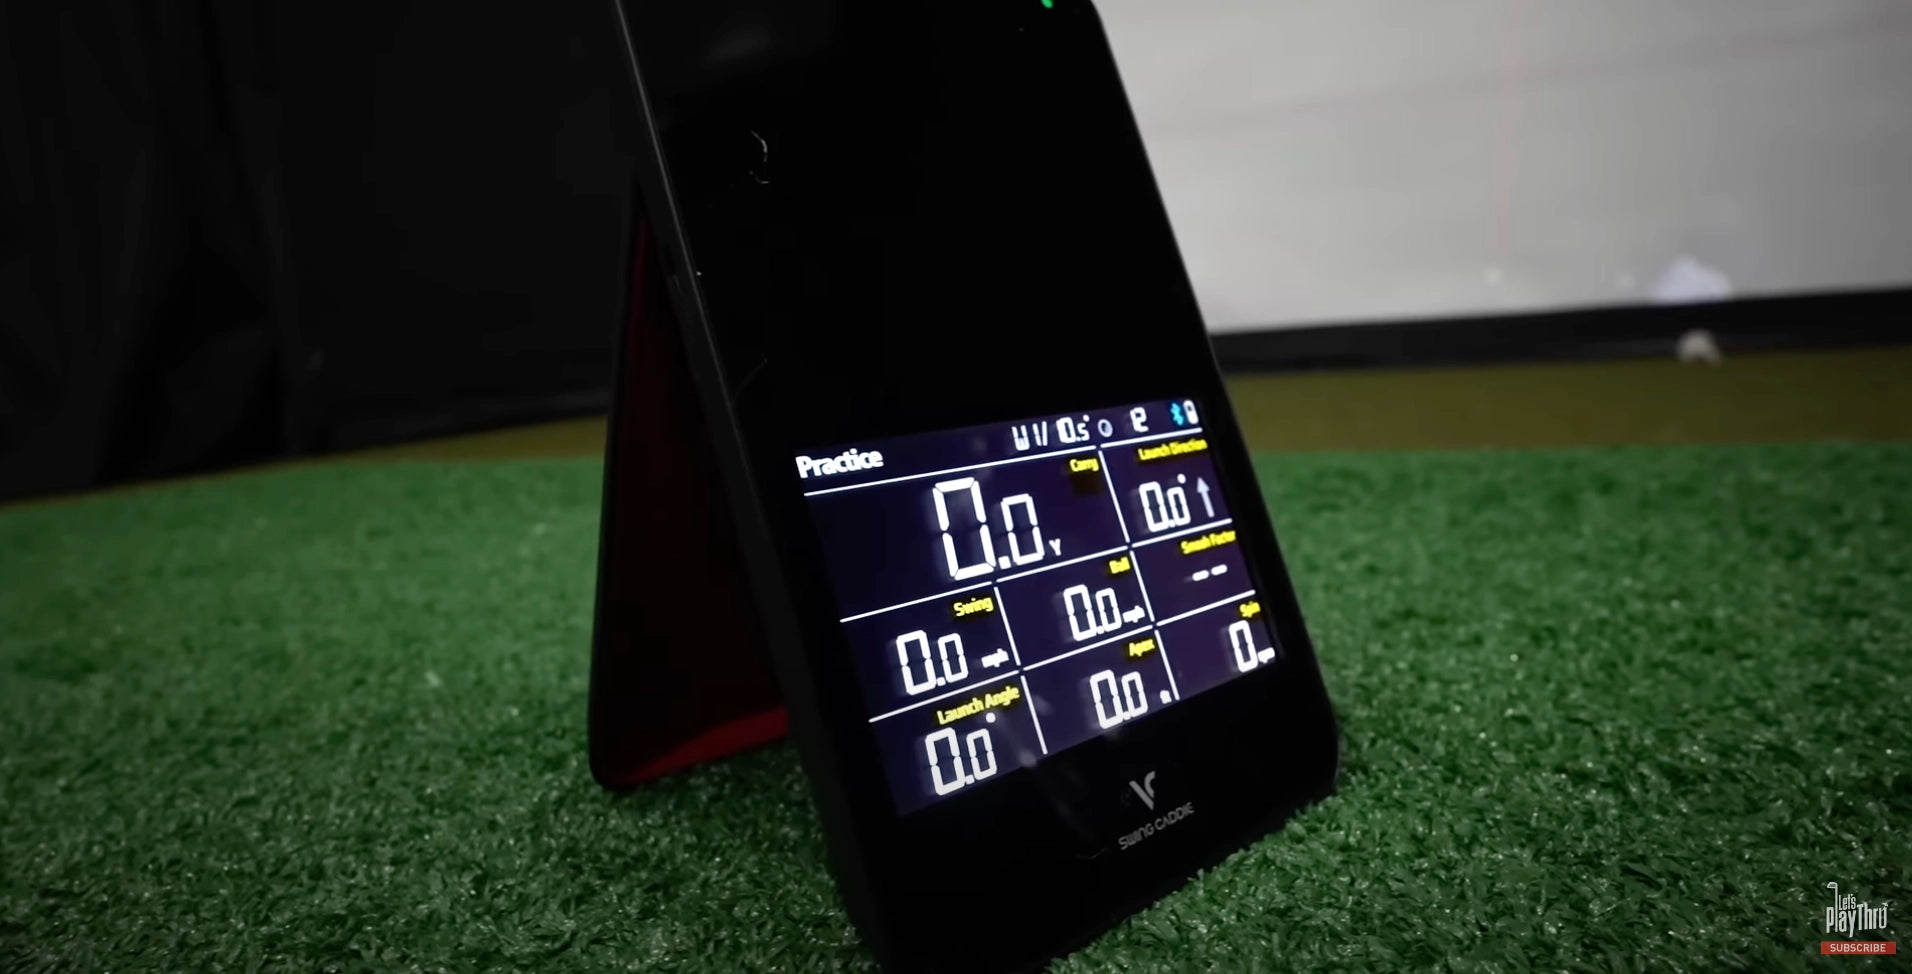 The Swing Caddie SC4 launch monitor set up in a golf simulator